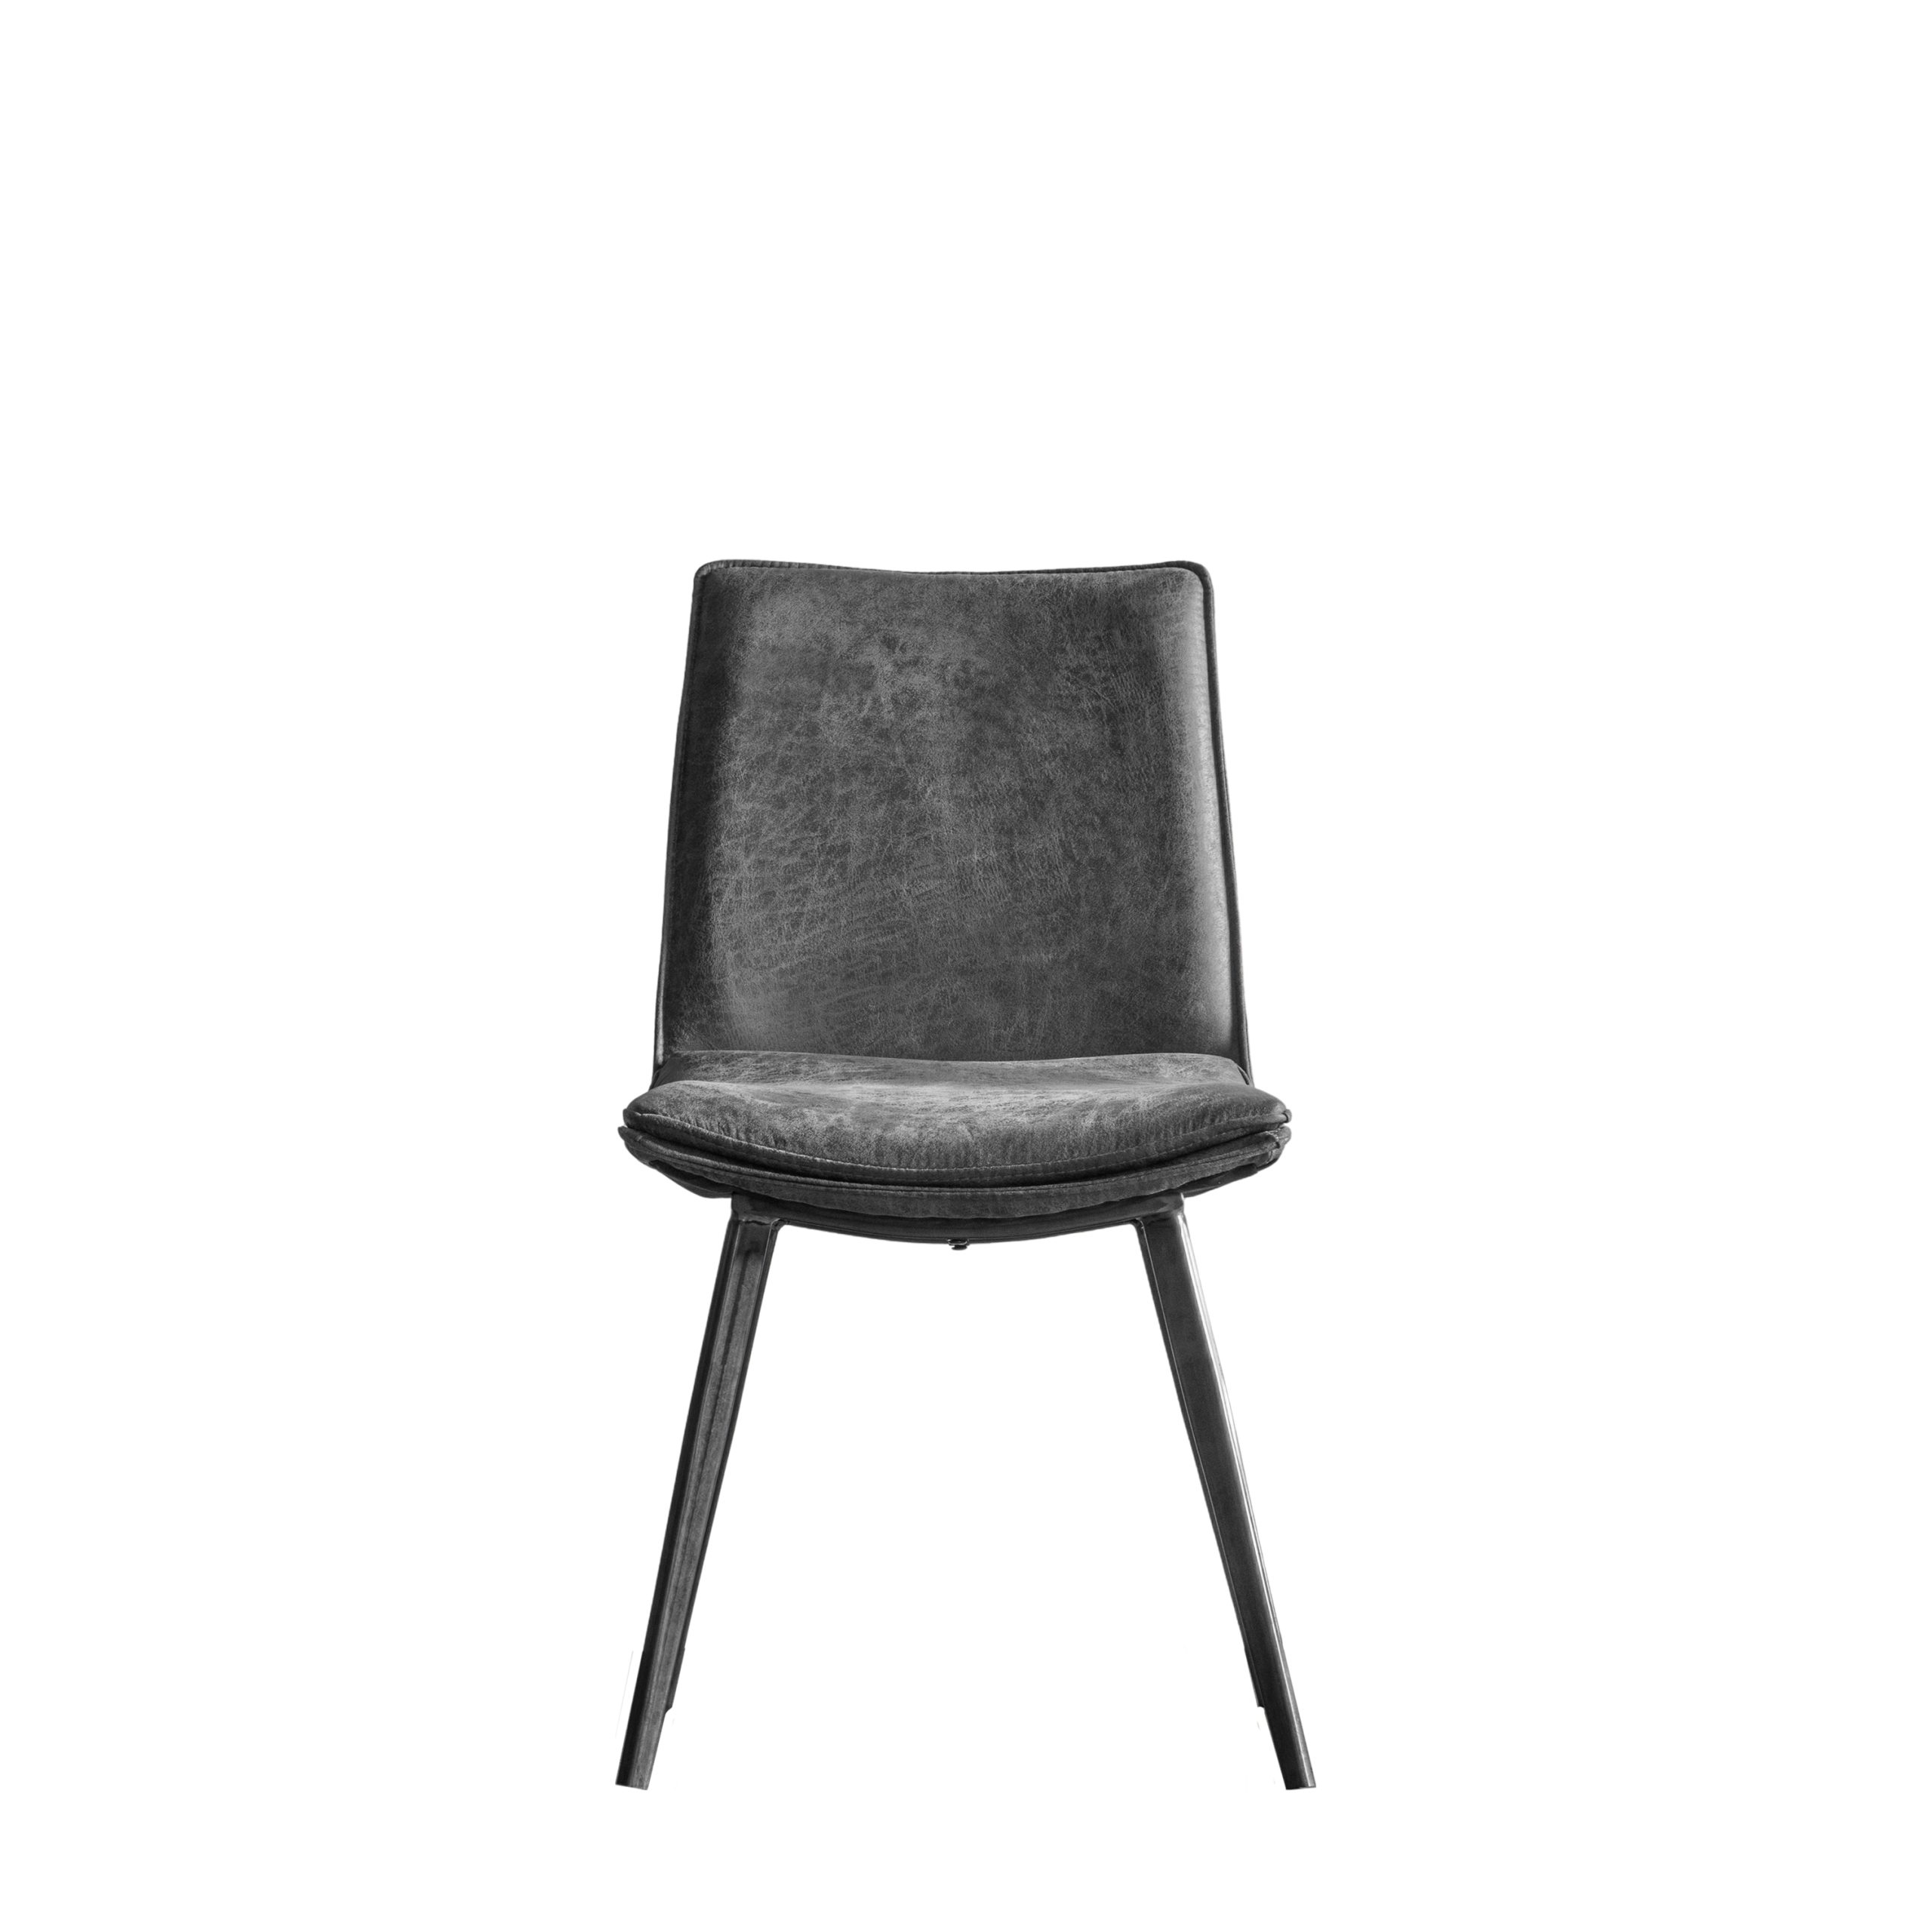 Gallery Direct Hinks Chair Grey (Set of 2)